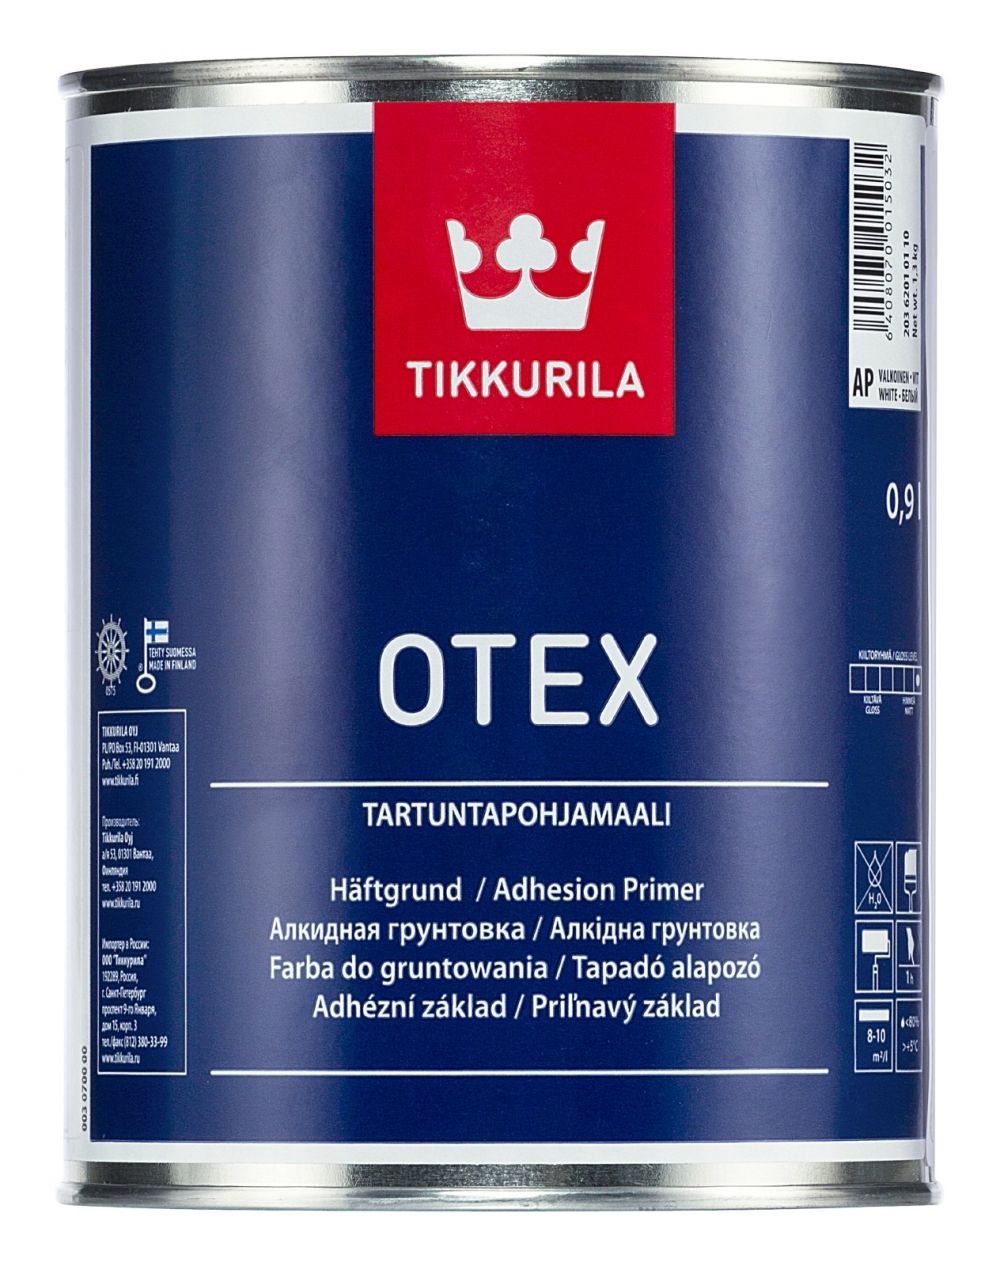 Tikkurila Otex the high performing interior paint for your home